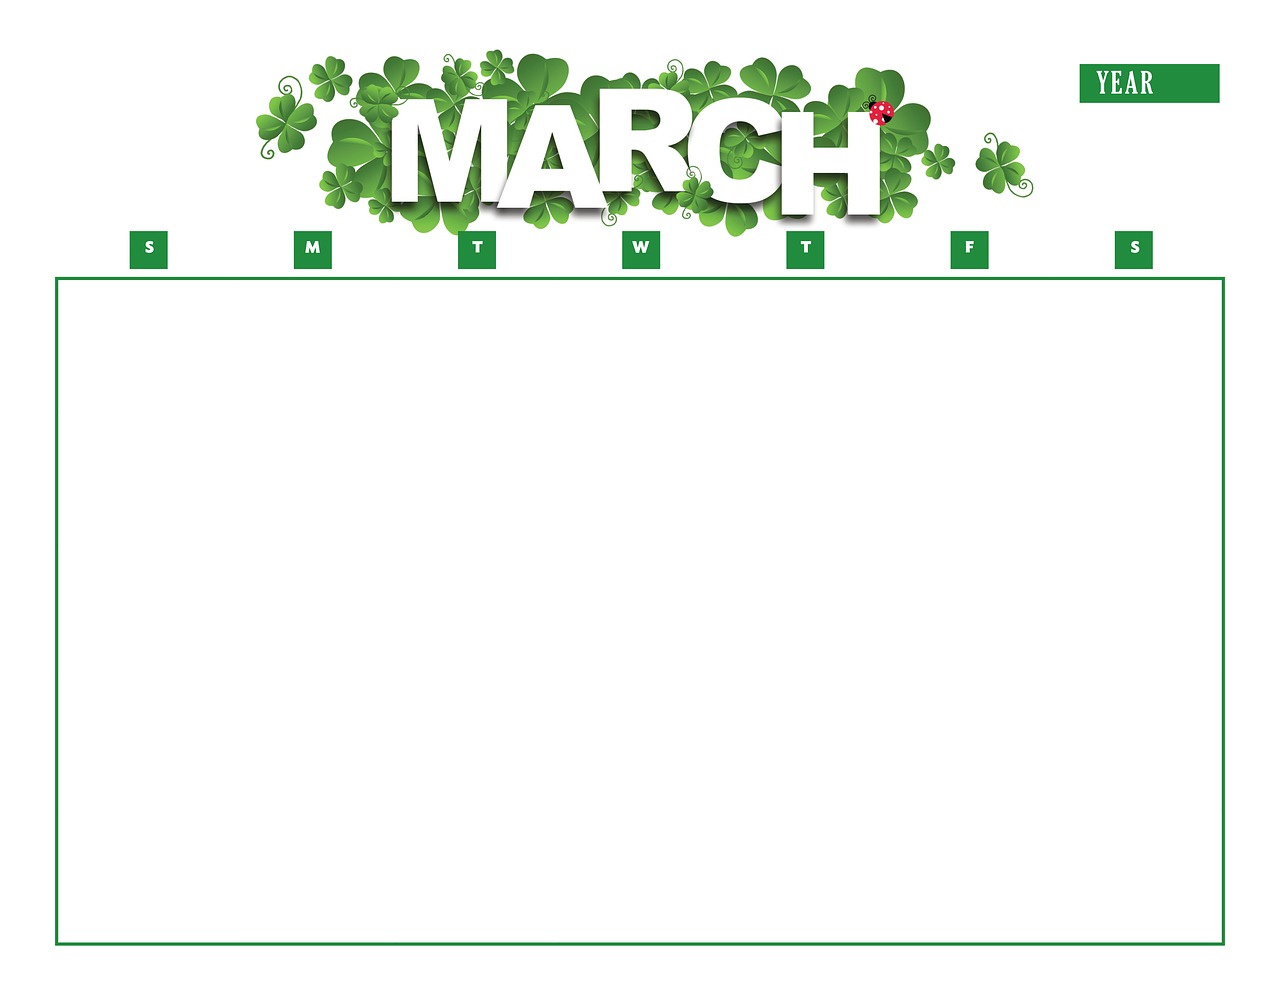 Download free photo of Calendar, march, year, month, calendar template